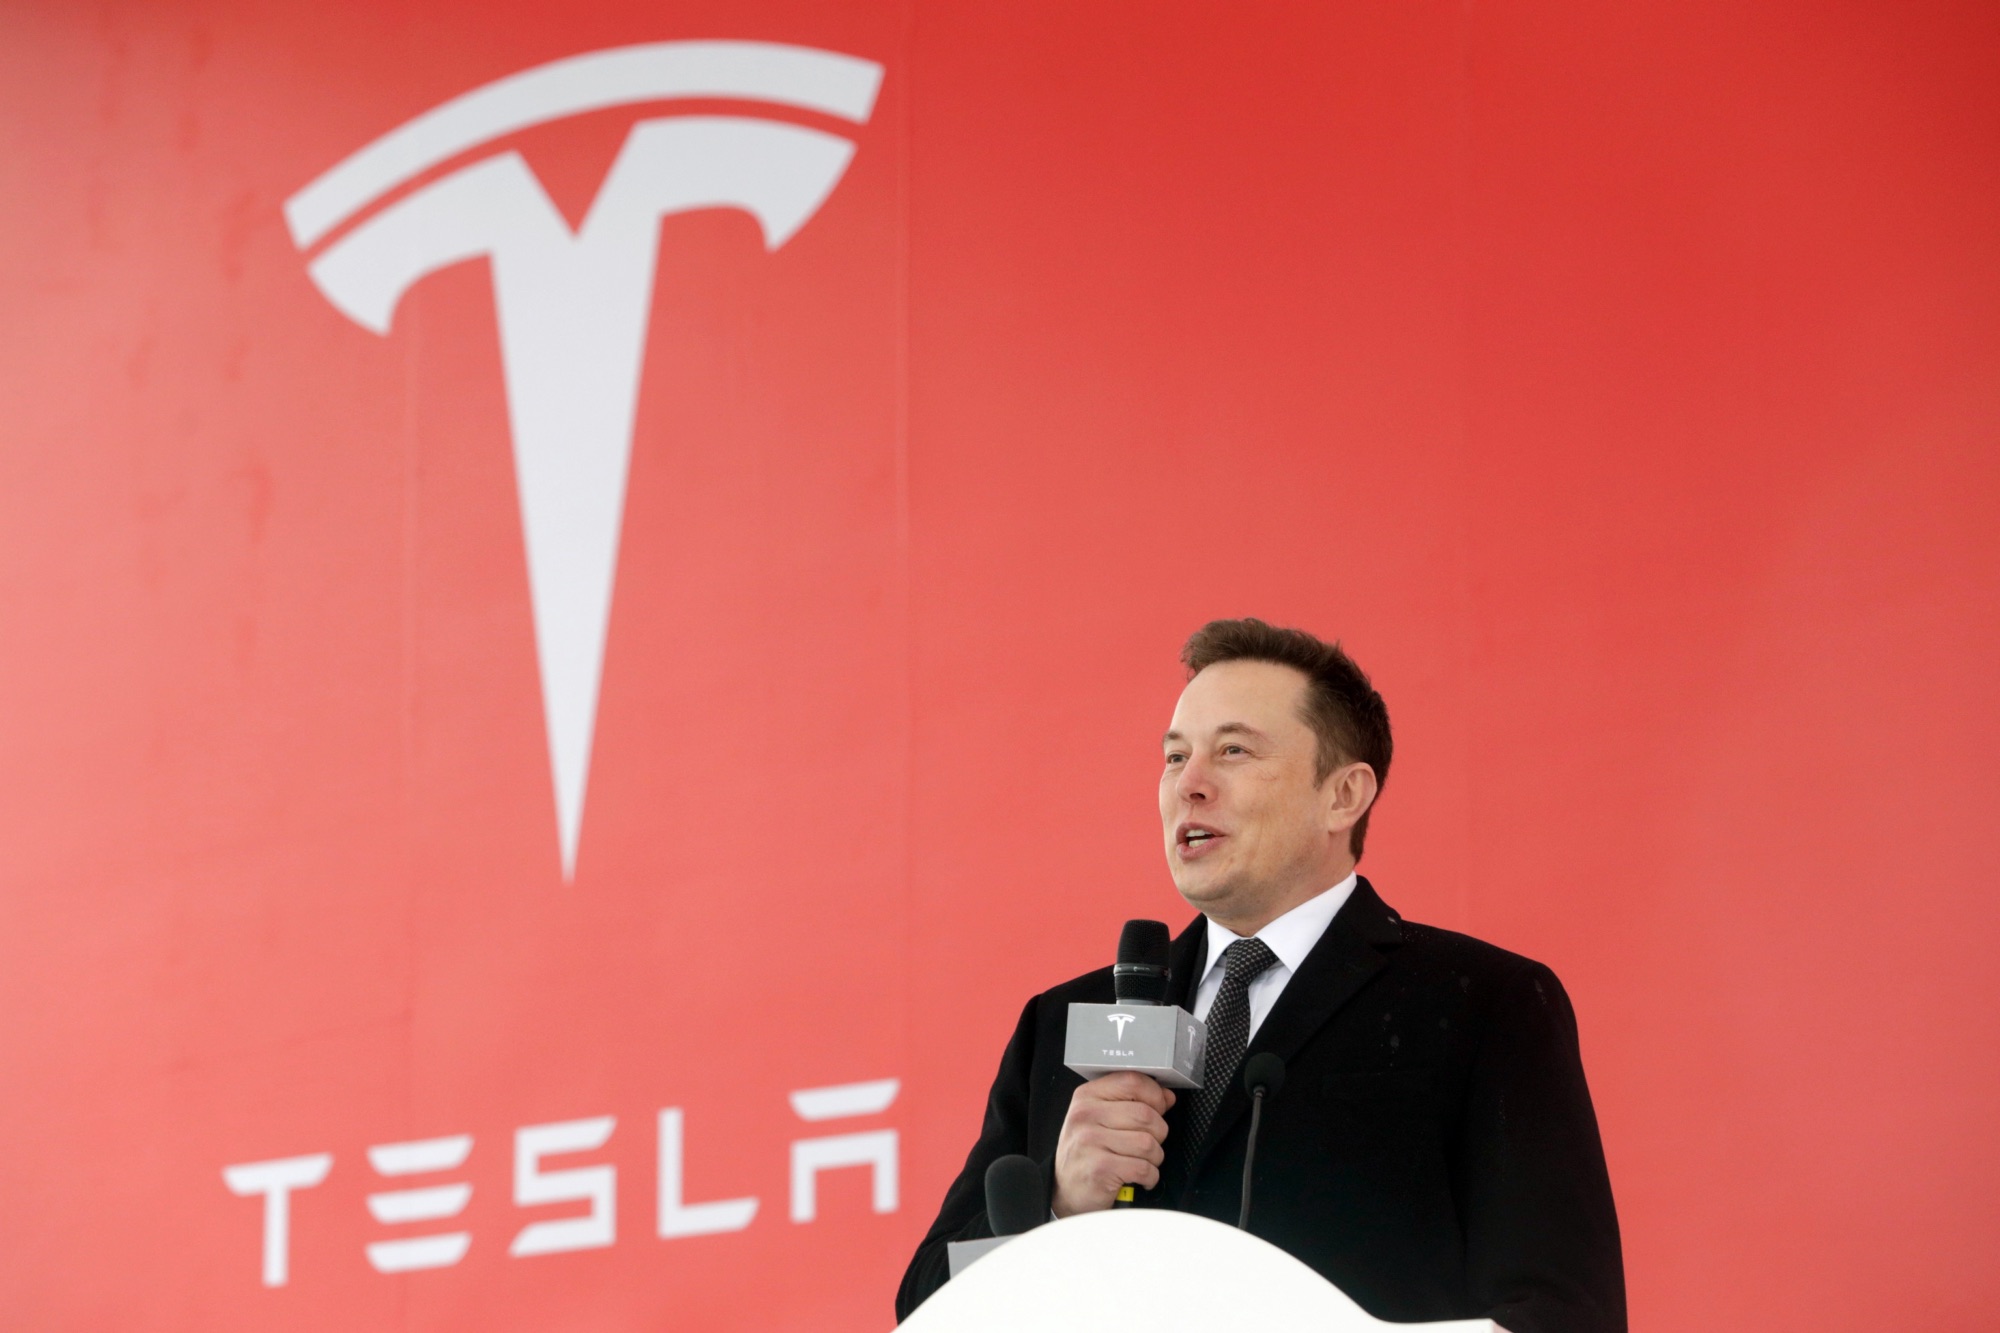 Tesla ramps up communications as Elon Musk becomes more controversial 